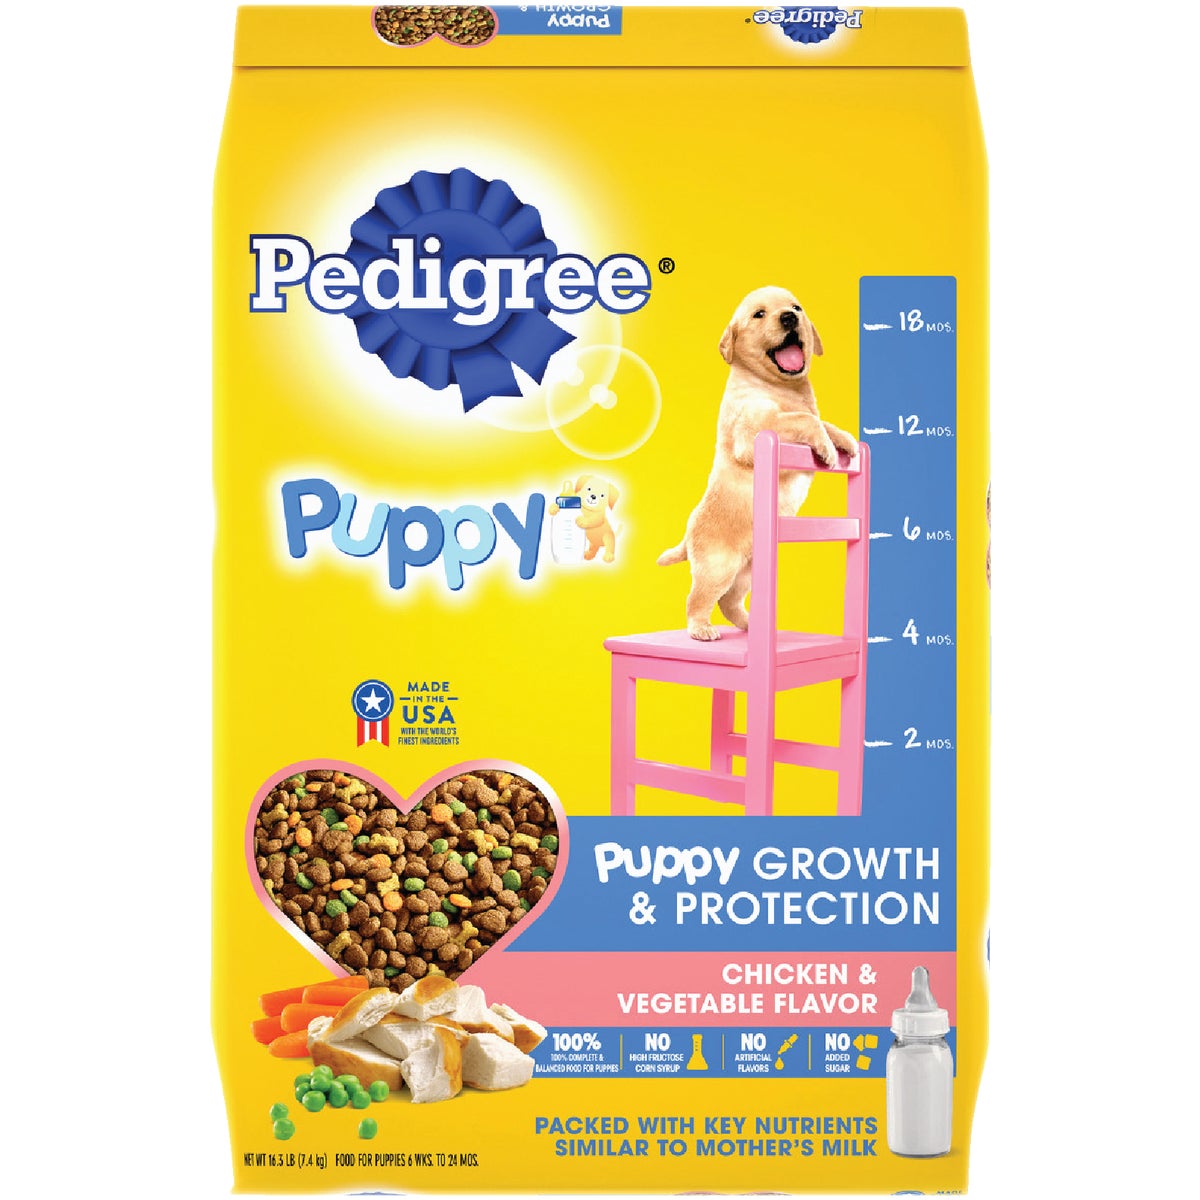 Pedigree Puppy Targeted Nutrition 16.3 Lb. Dry Dog Food